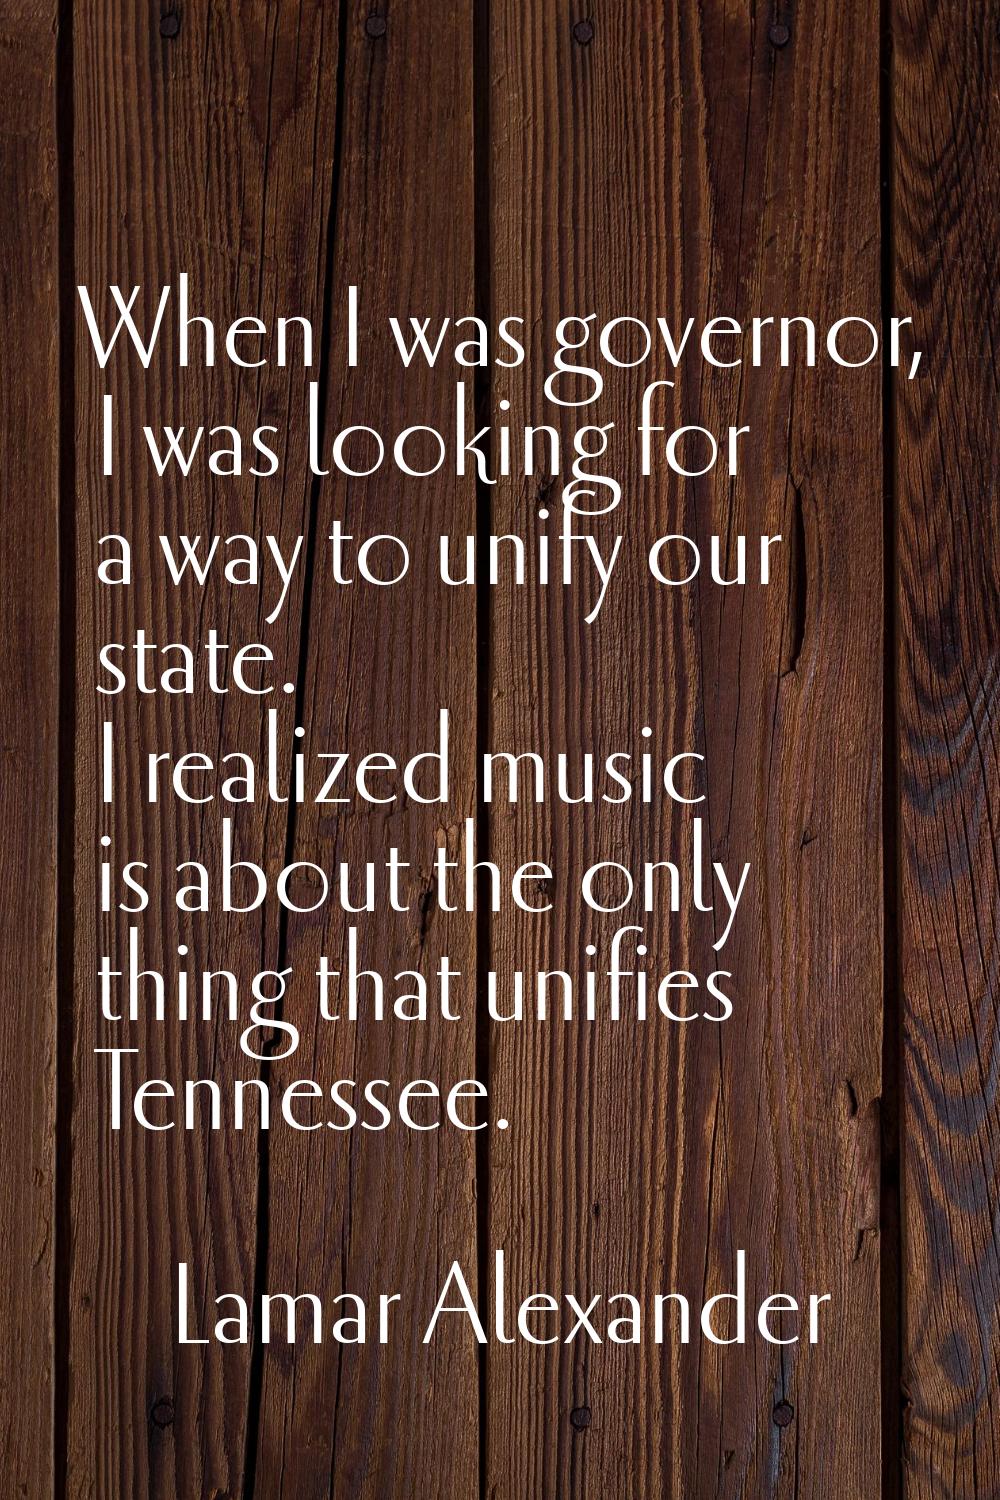 When I was governor, I was looking for a way to unify our state. I realized music is about the only